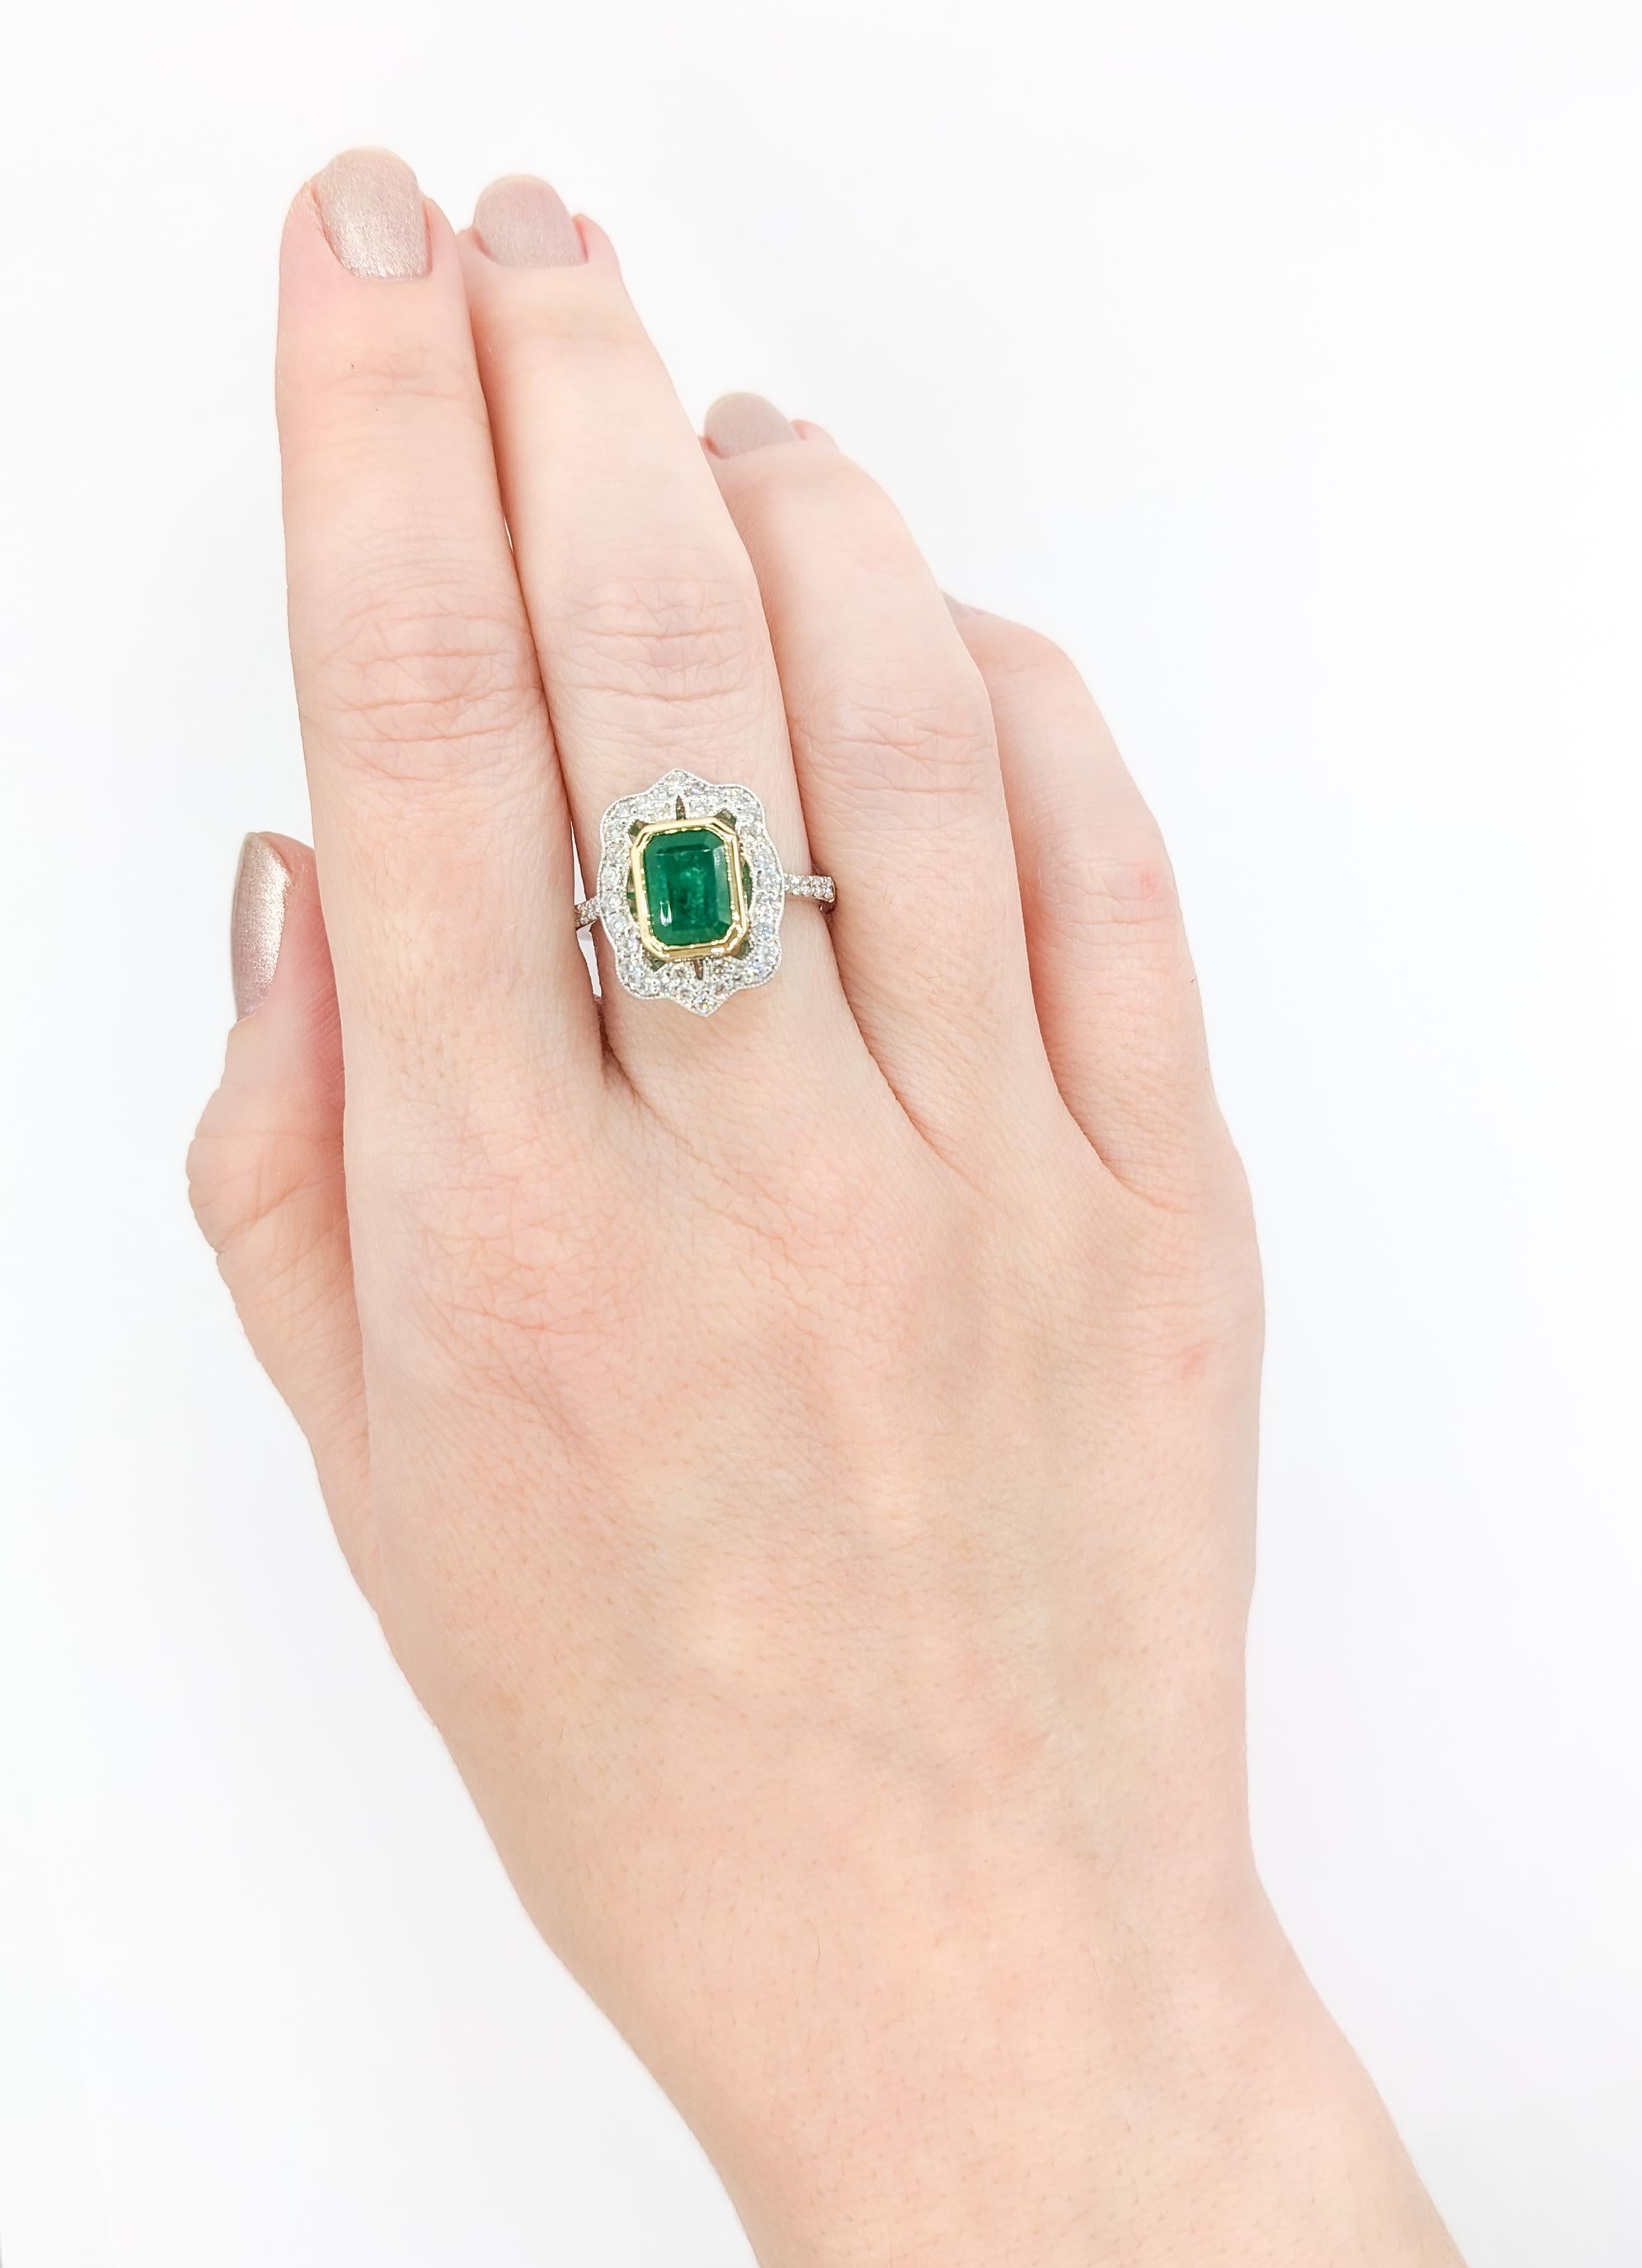 Emerald Cut Two-Tone Emerald & Diamond Cocktail Ring For Sale